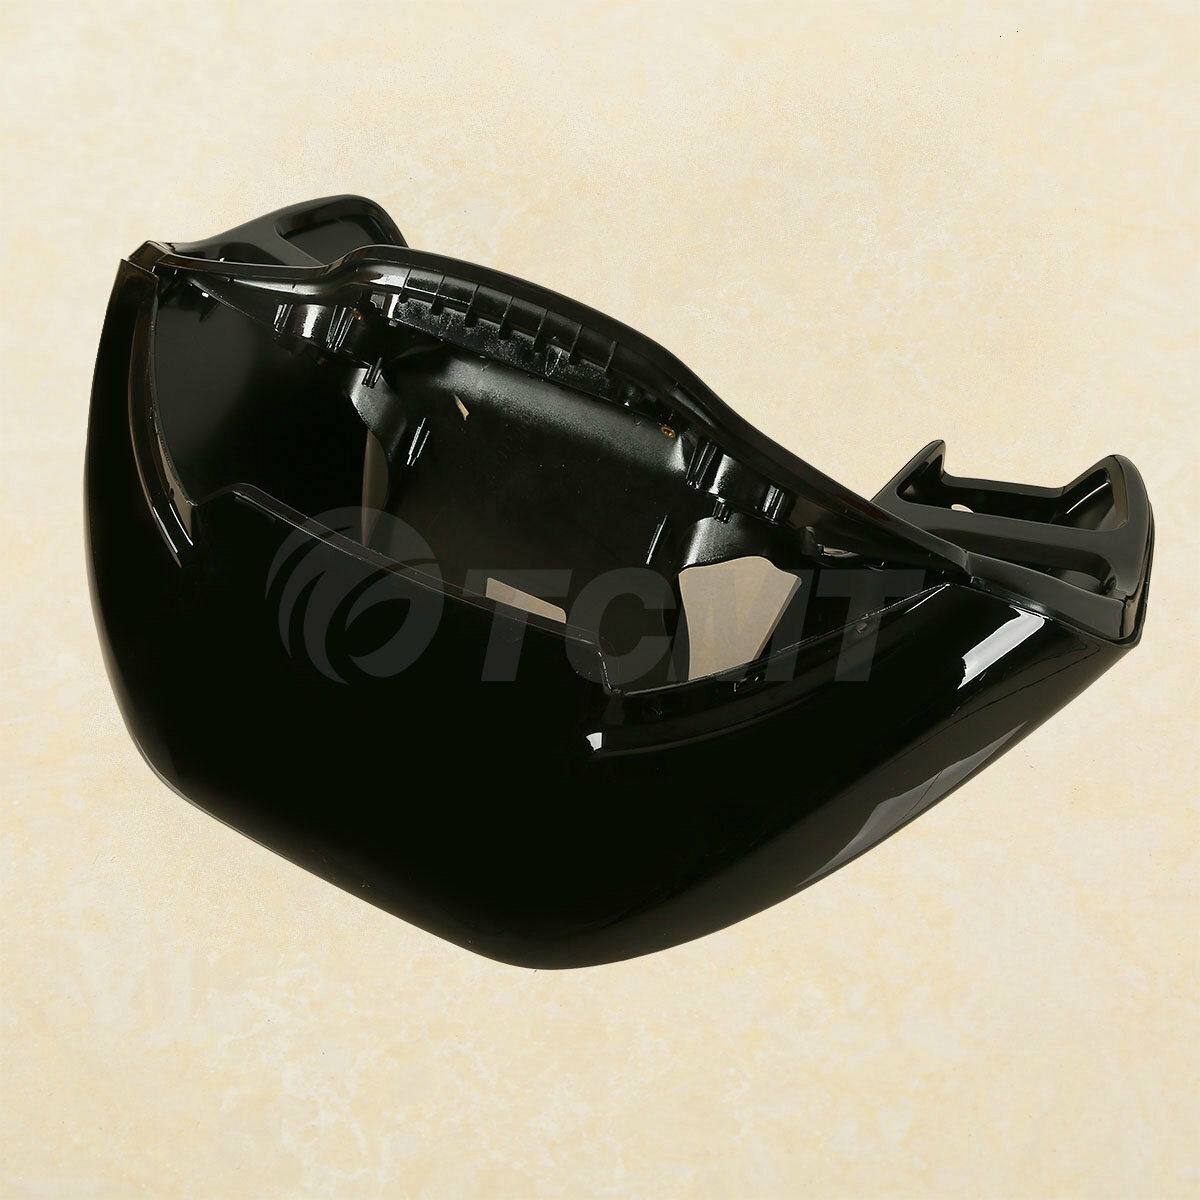 Vivid Black ABS Inner & Outer Fairing for Harley Davidson Road Glide FLTRX 15-22 - Moto Life Products